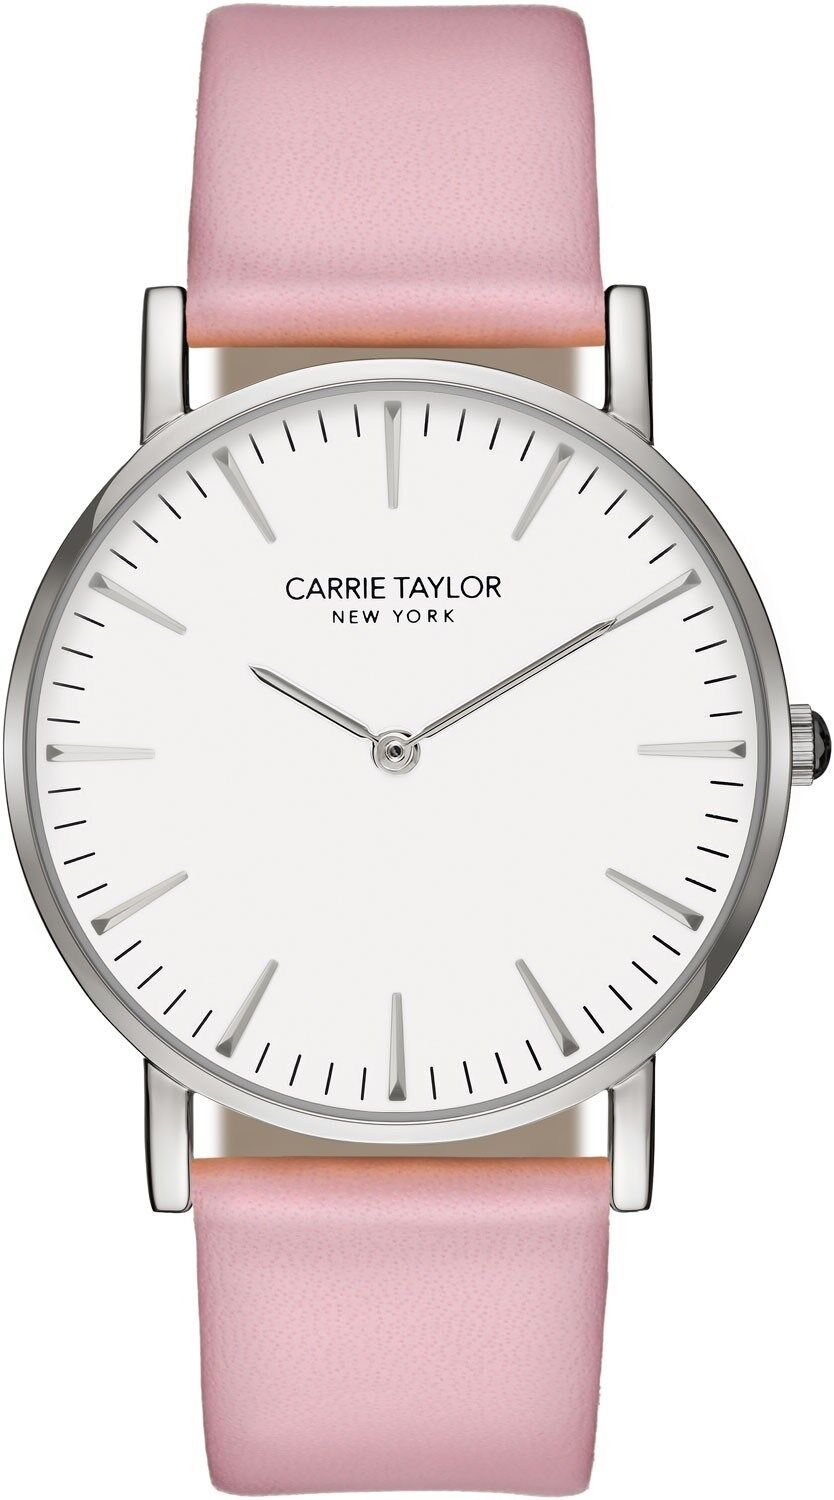 Taylor Carrie Taylor Lexington Silver/White Pink Leather